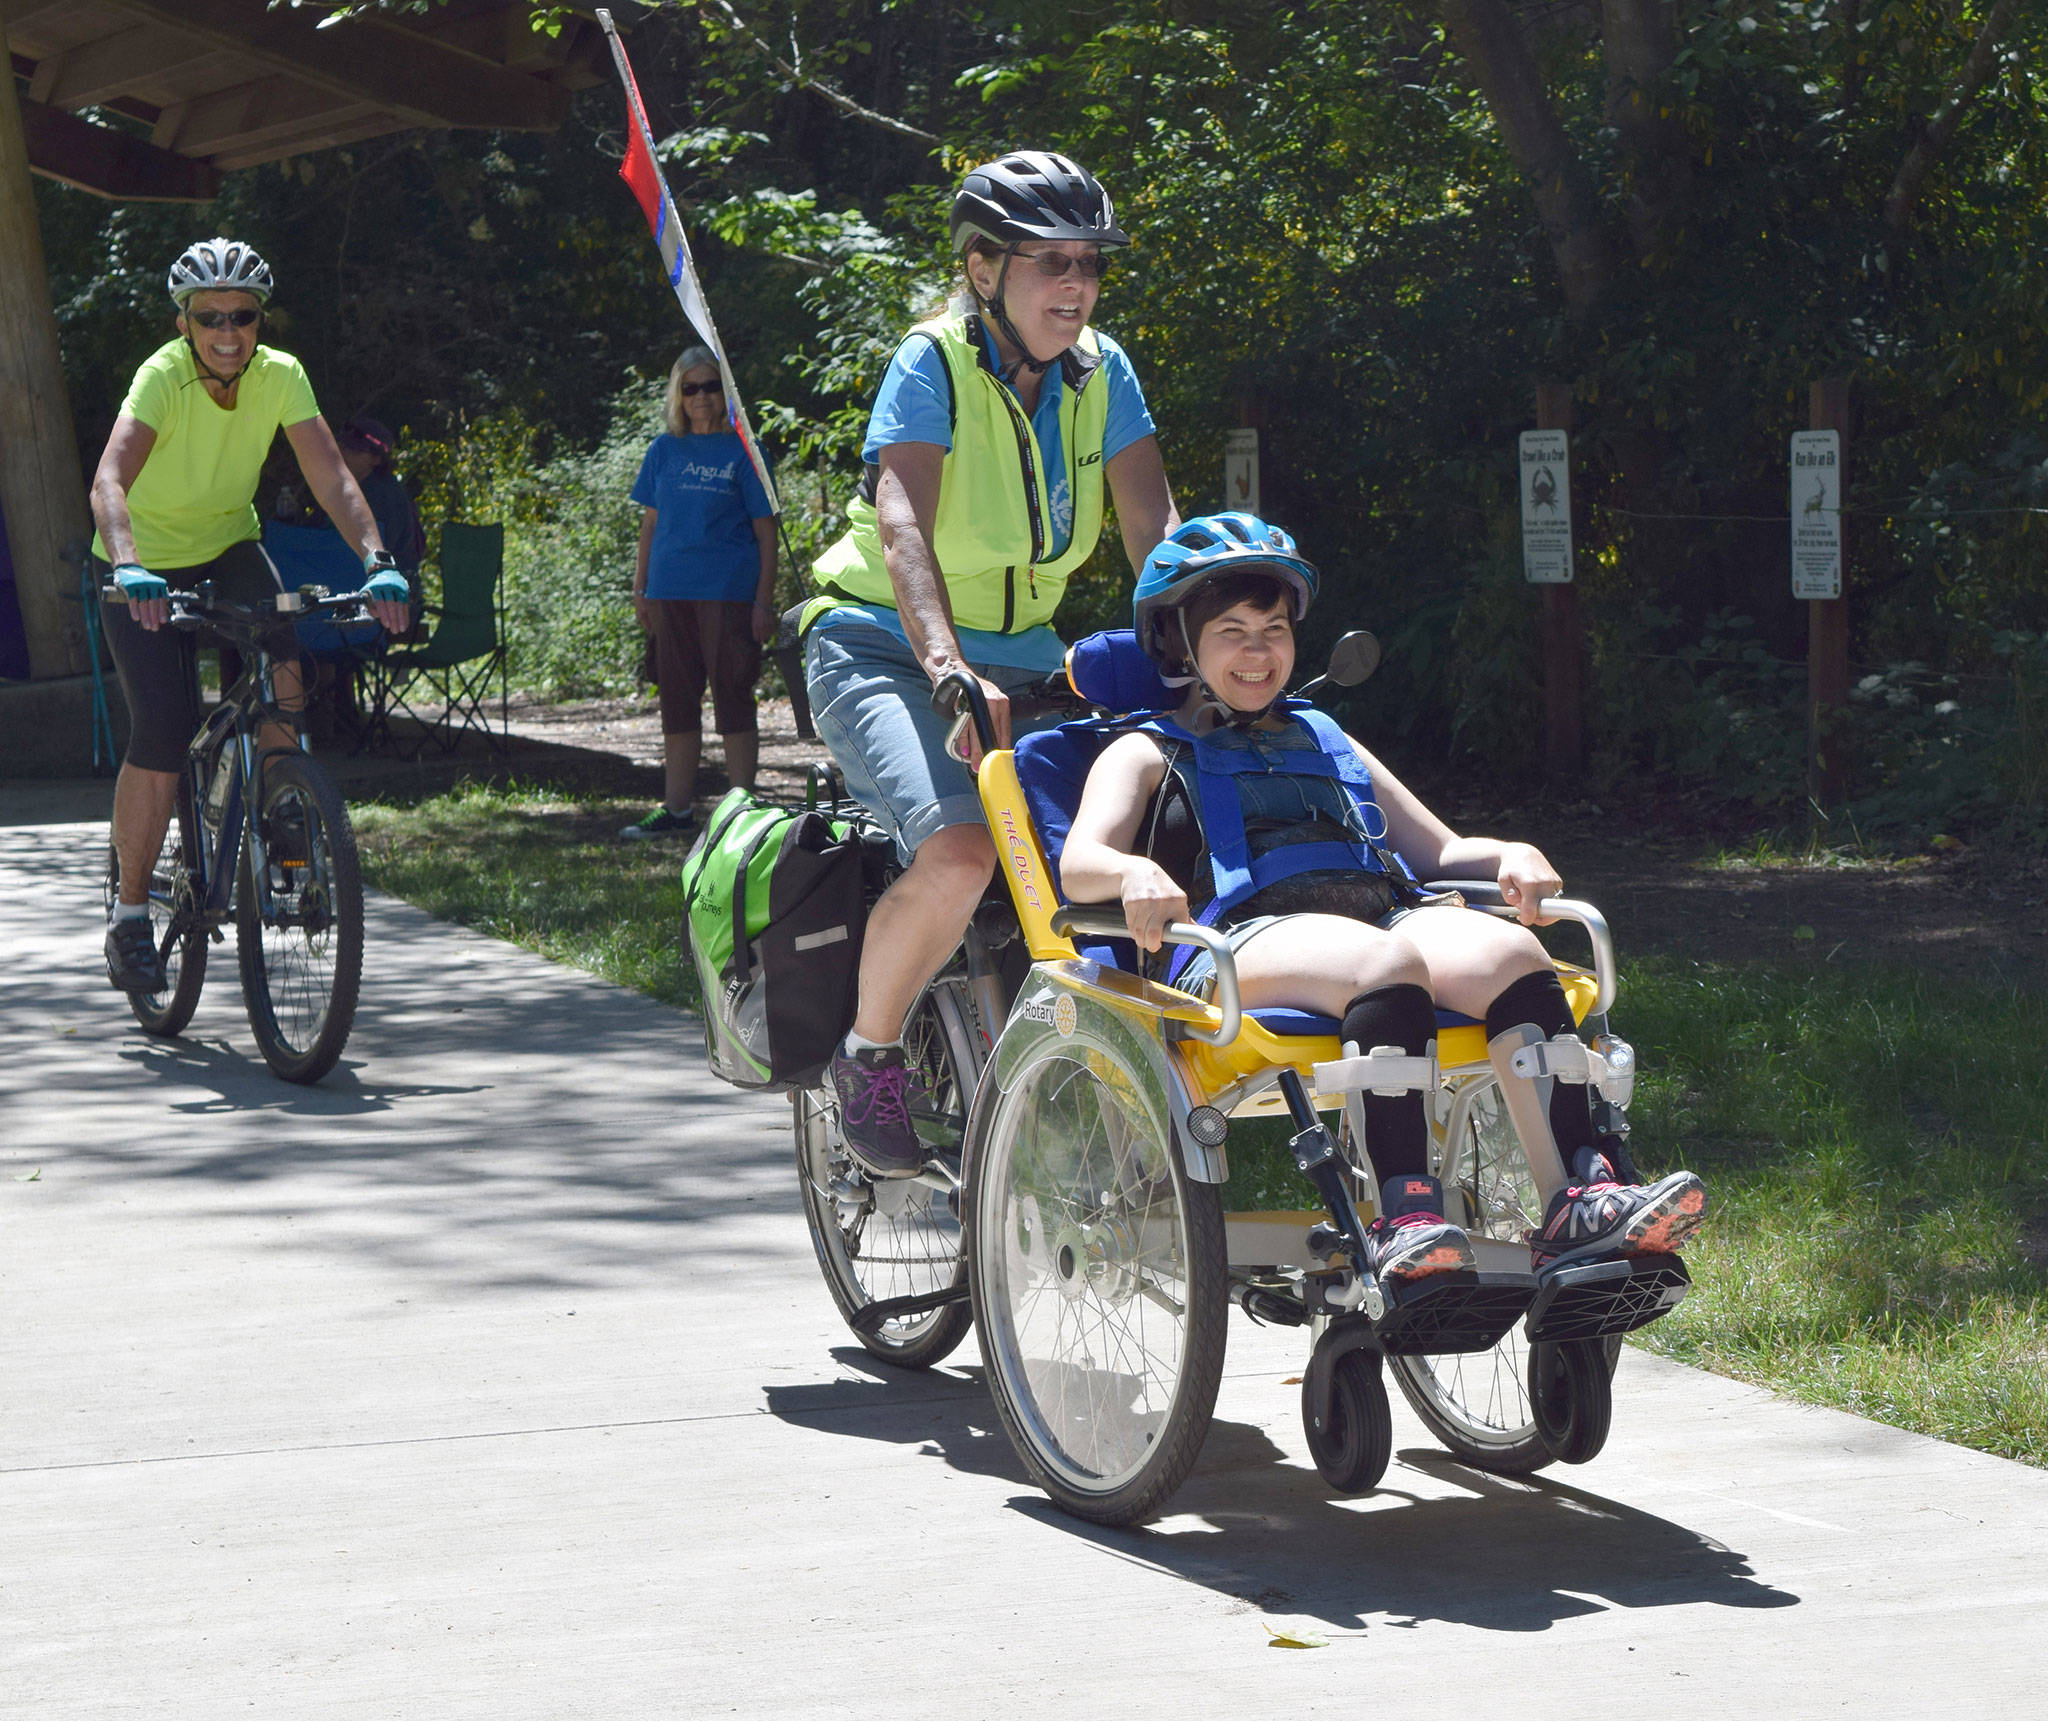 Piloted by Sequim Wheelers volunteer Elaine Cates, center, Kaitlyn Winn, foreground, enjoyed a ride on a duet wheelchair bicycle during a Clallam Mosaic sponsored field trip to Railroad Bridge Park on July 13. Riding as a safety was Sequim Wheelers volunteer Michele Fraker.